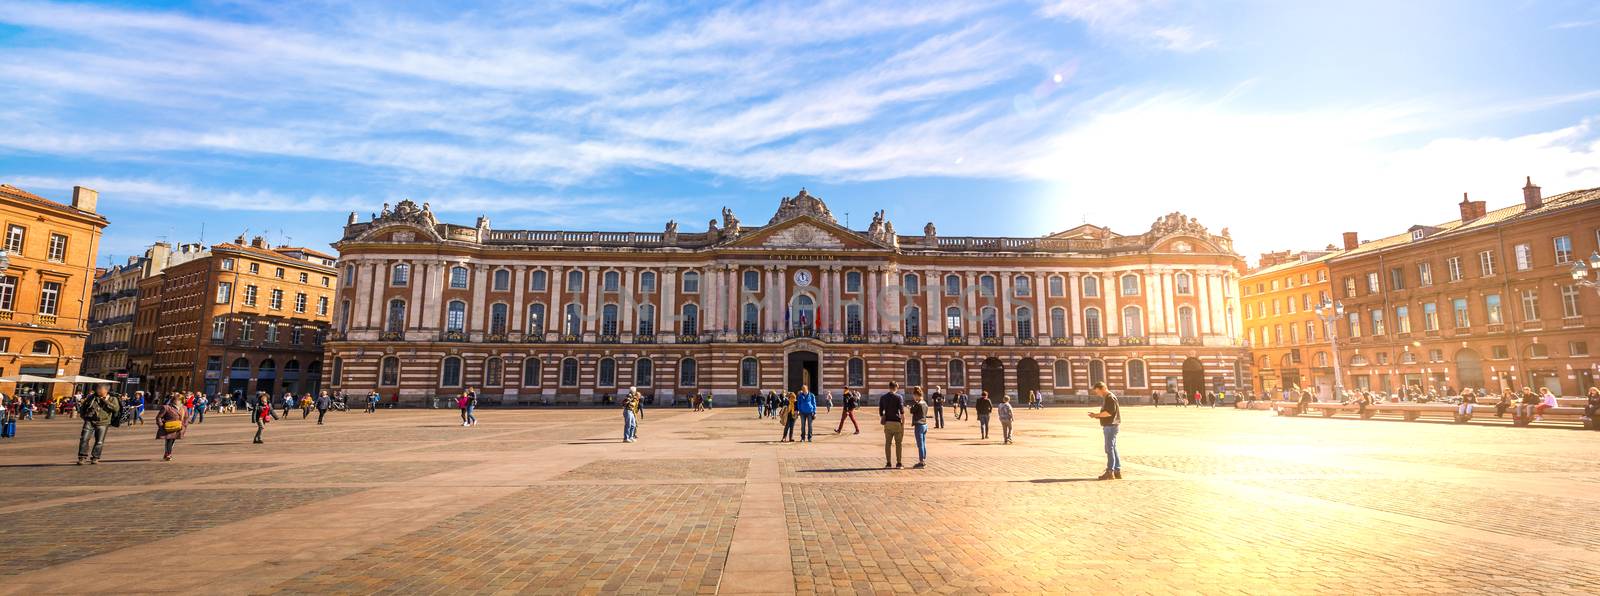 Place du Capitole is the emblematic center of the city of Toulouse. In Occitania, France by Frederic